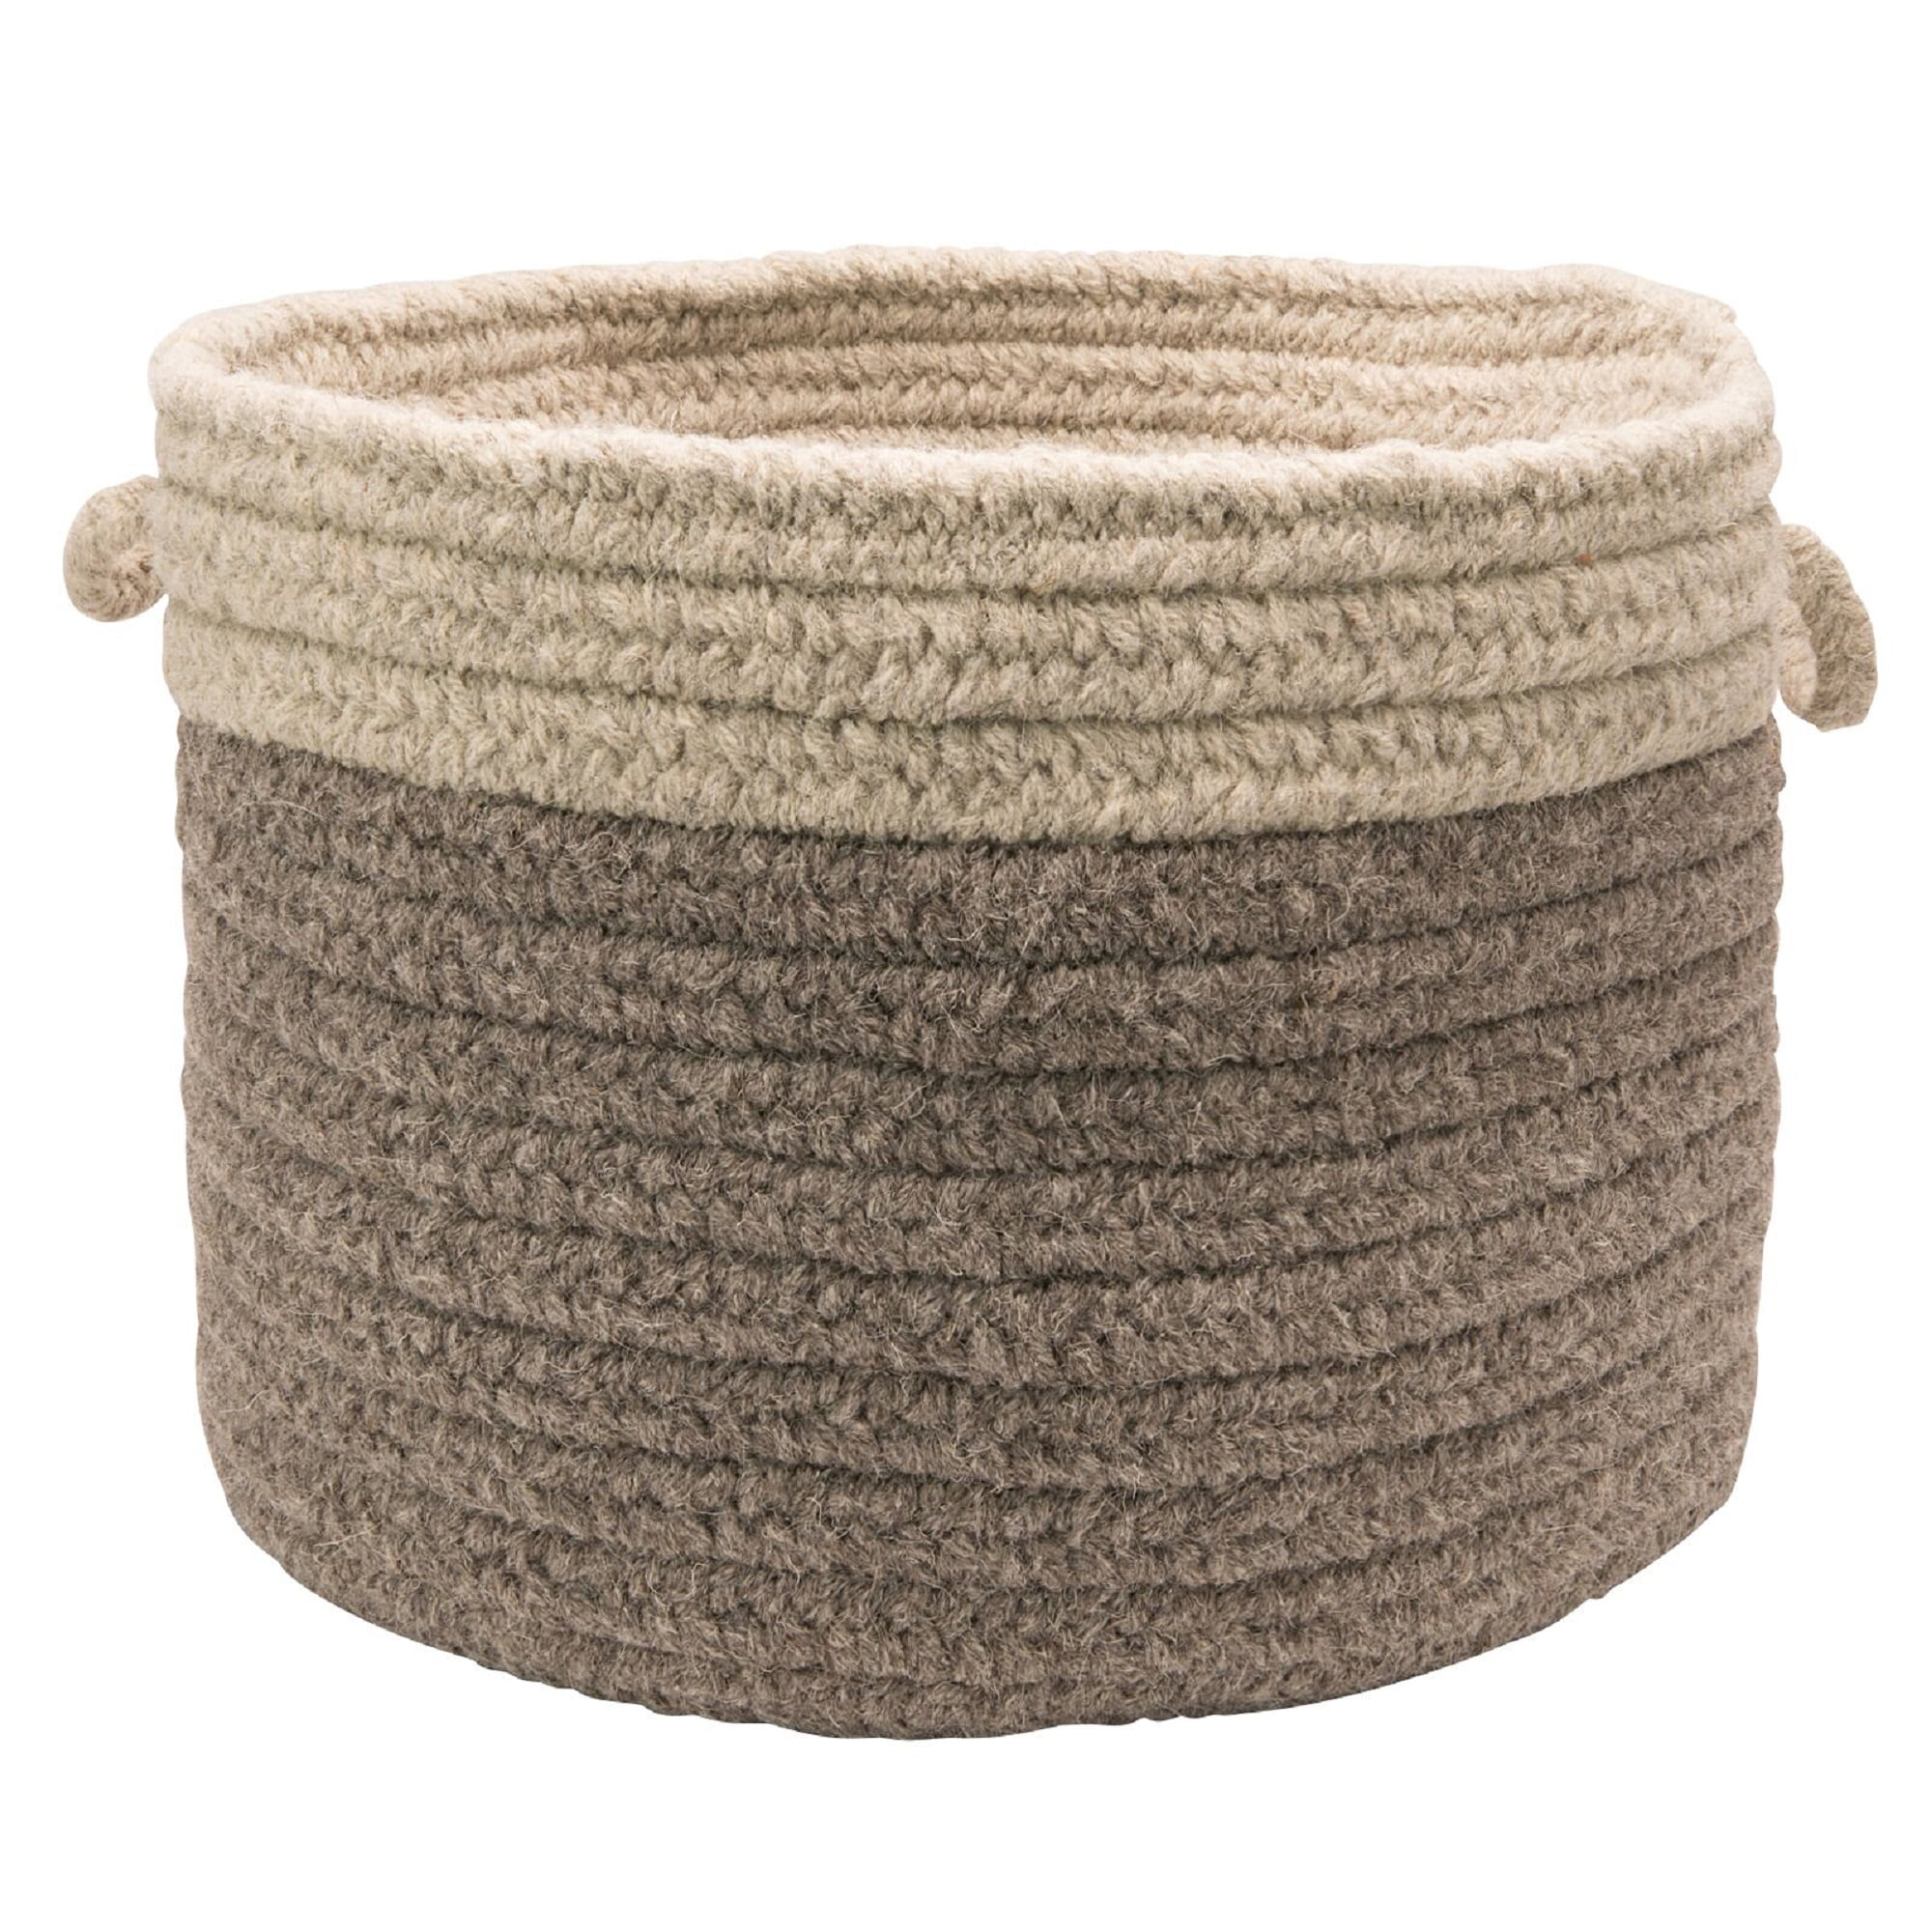 Picture of Colonial Mills CN21A018X018 18 x 12 in. Chunky Natural Wool Dipped Basket, Dark Gray & Light Gray